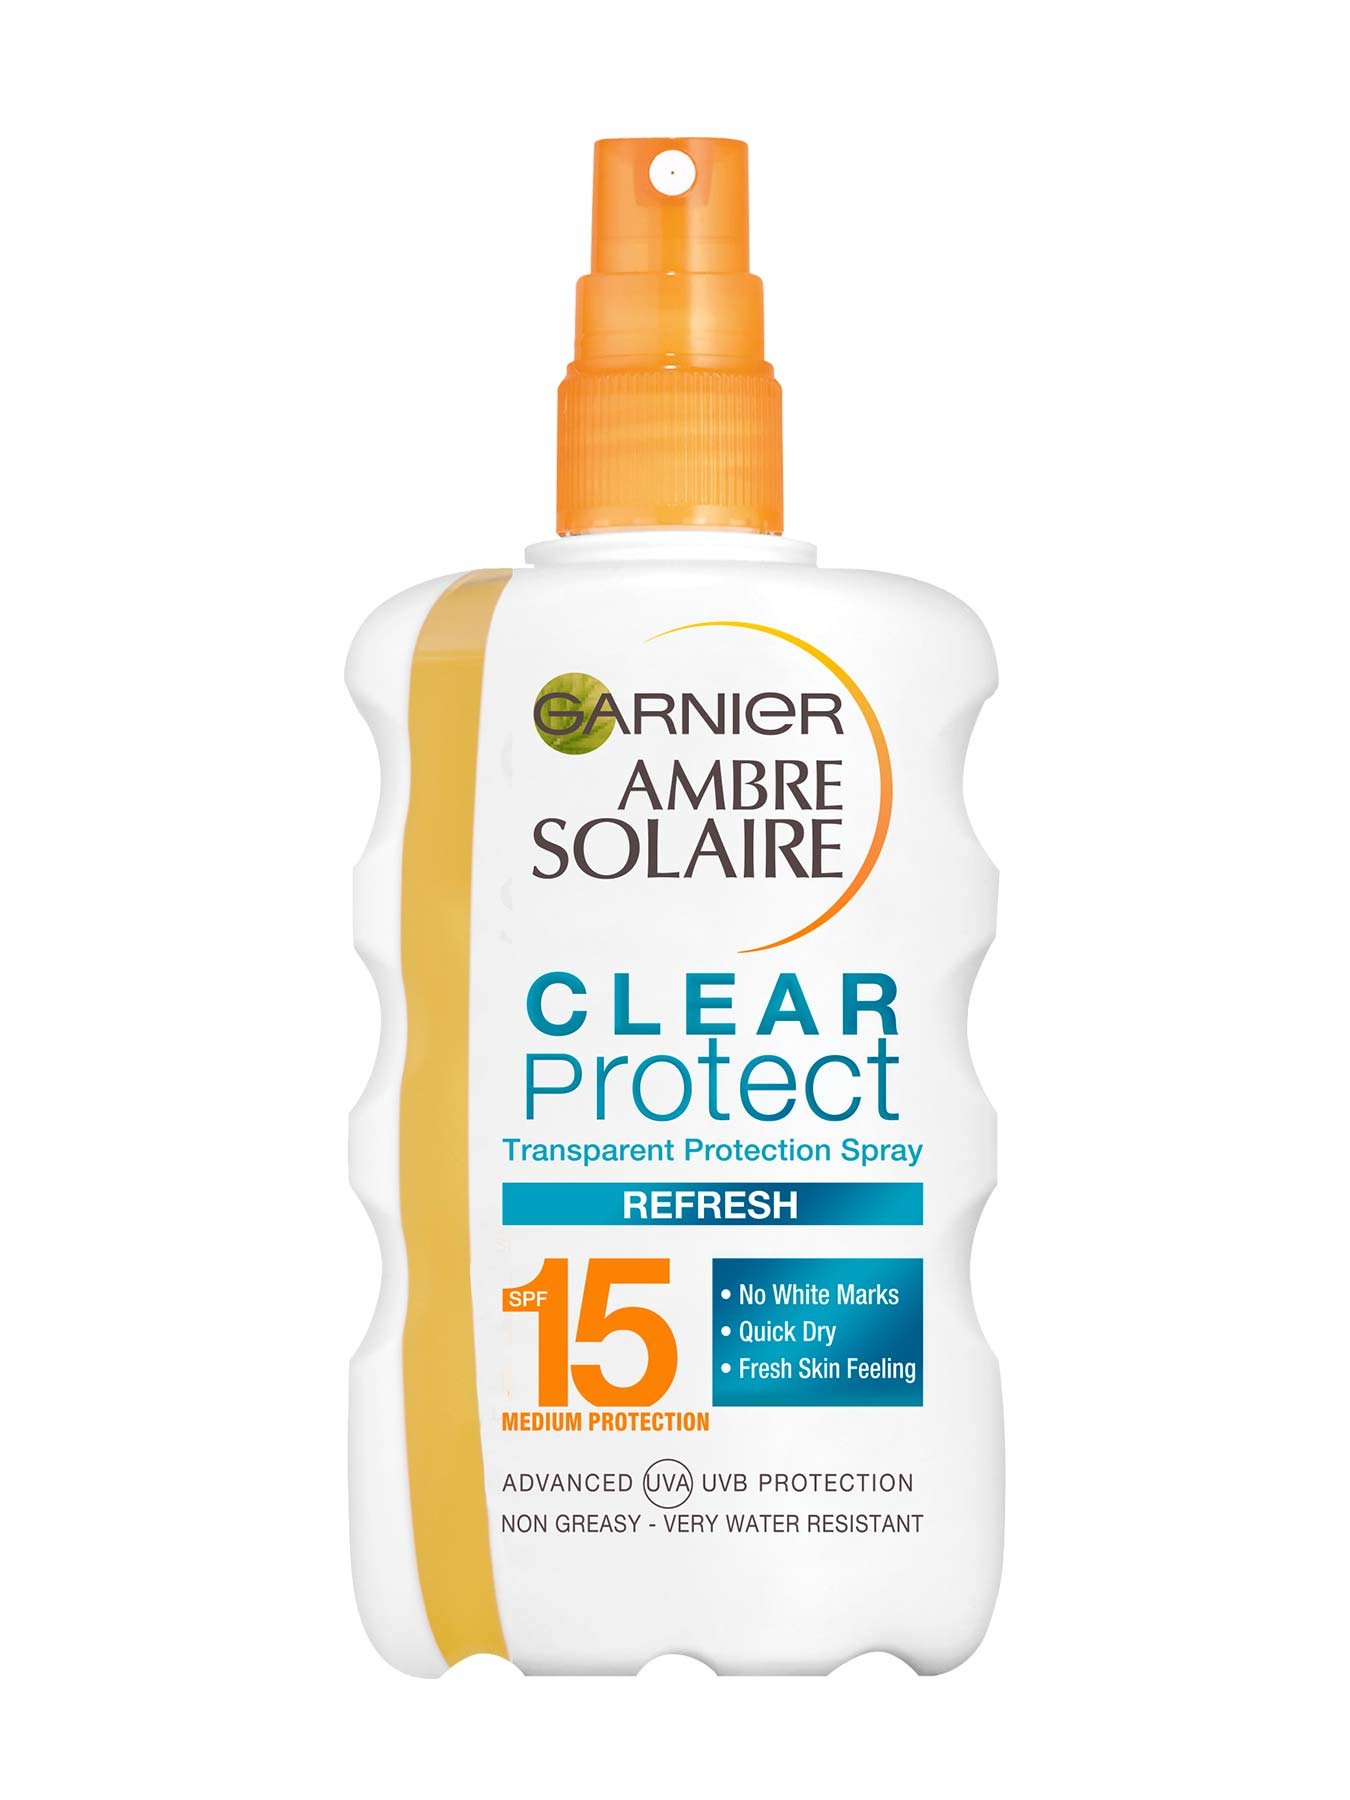 Ambre solaire clear protect spray spf15